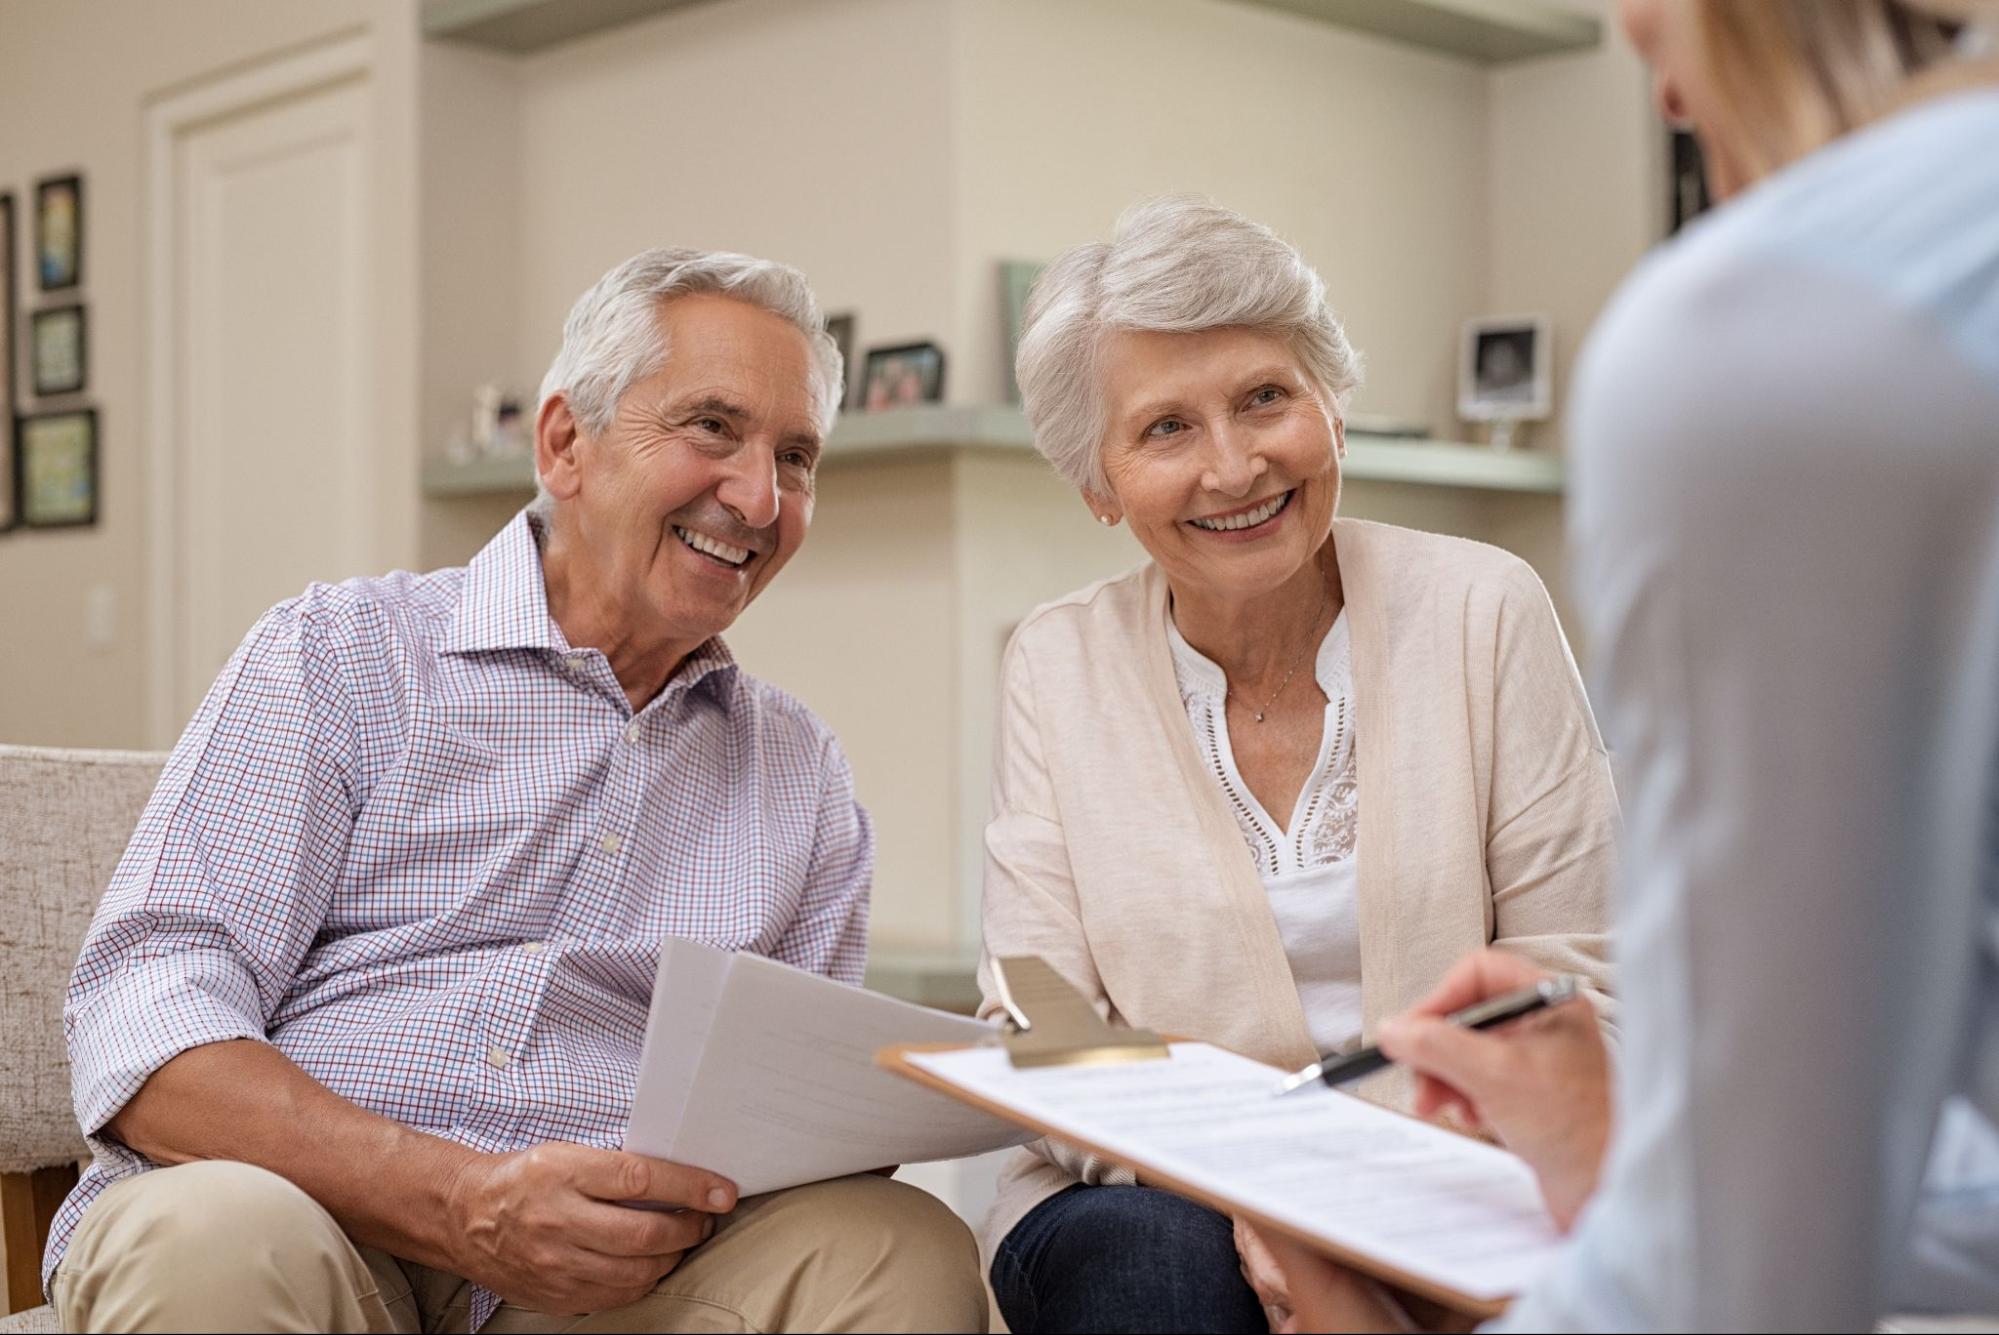 An elderly couple smiling warmly at someone off-camera while sitting on a couch, with the man holding papers and the woman beside him looking pleased. They appear to be in a discussion with a person holding a clipboard, suggesting a friendly consultation or meeting at home.